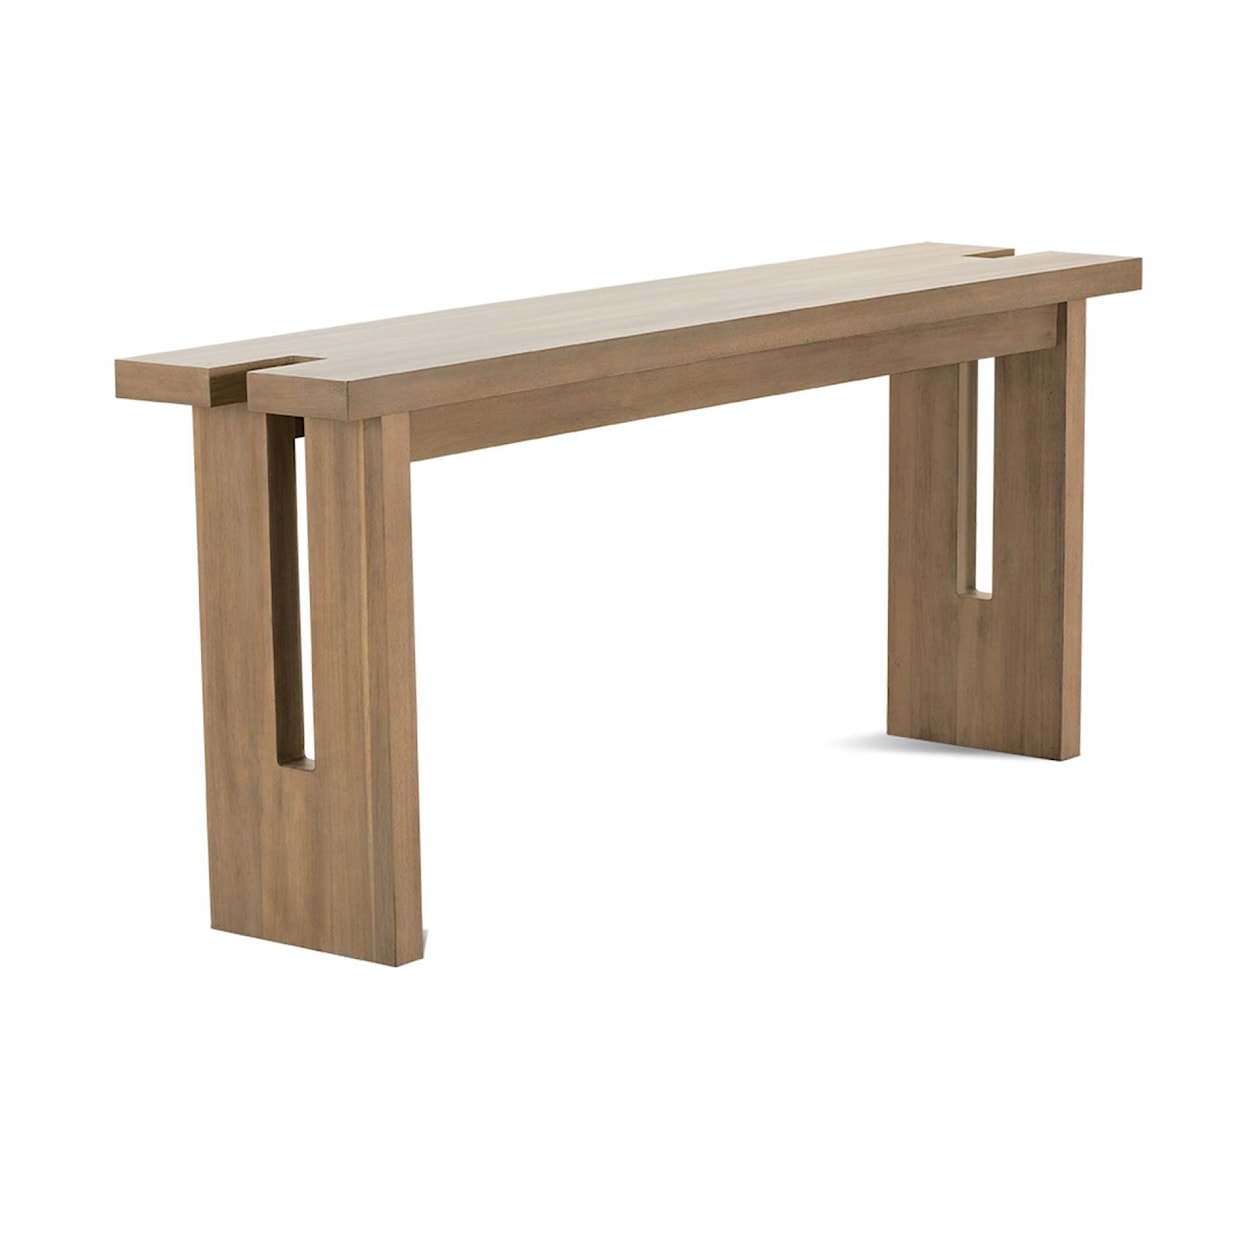 Rowe Theory Console Table 